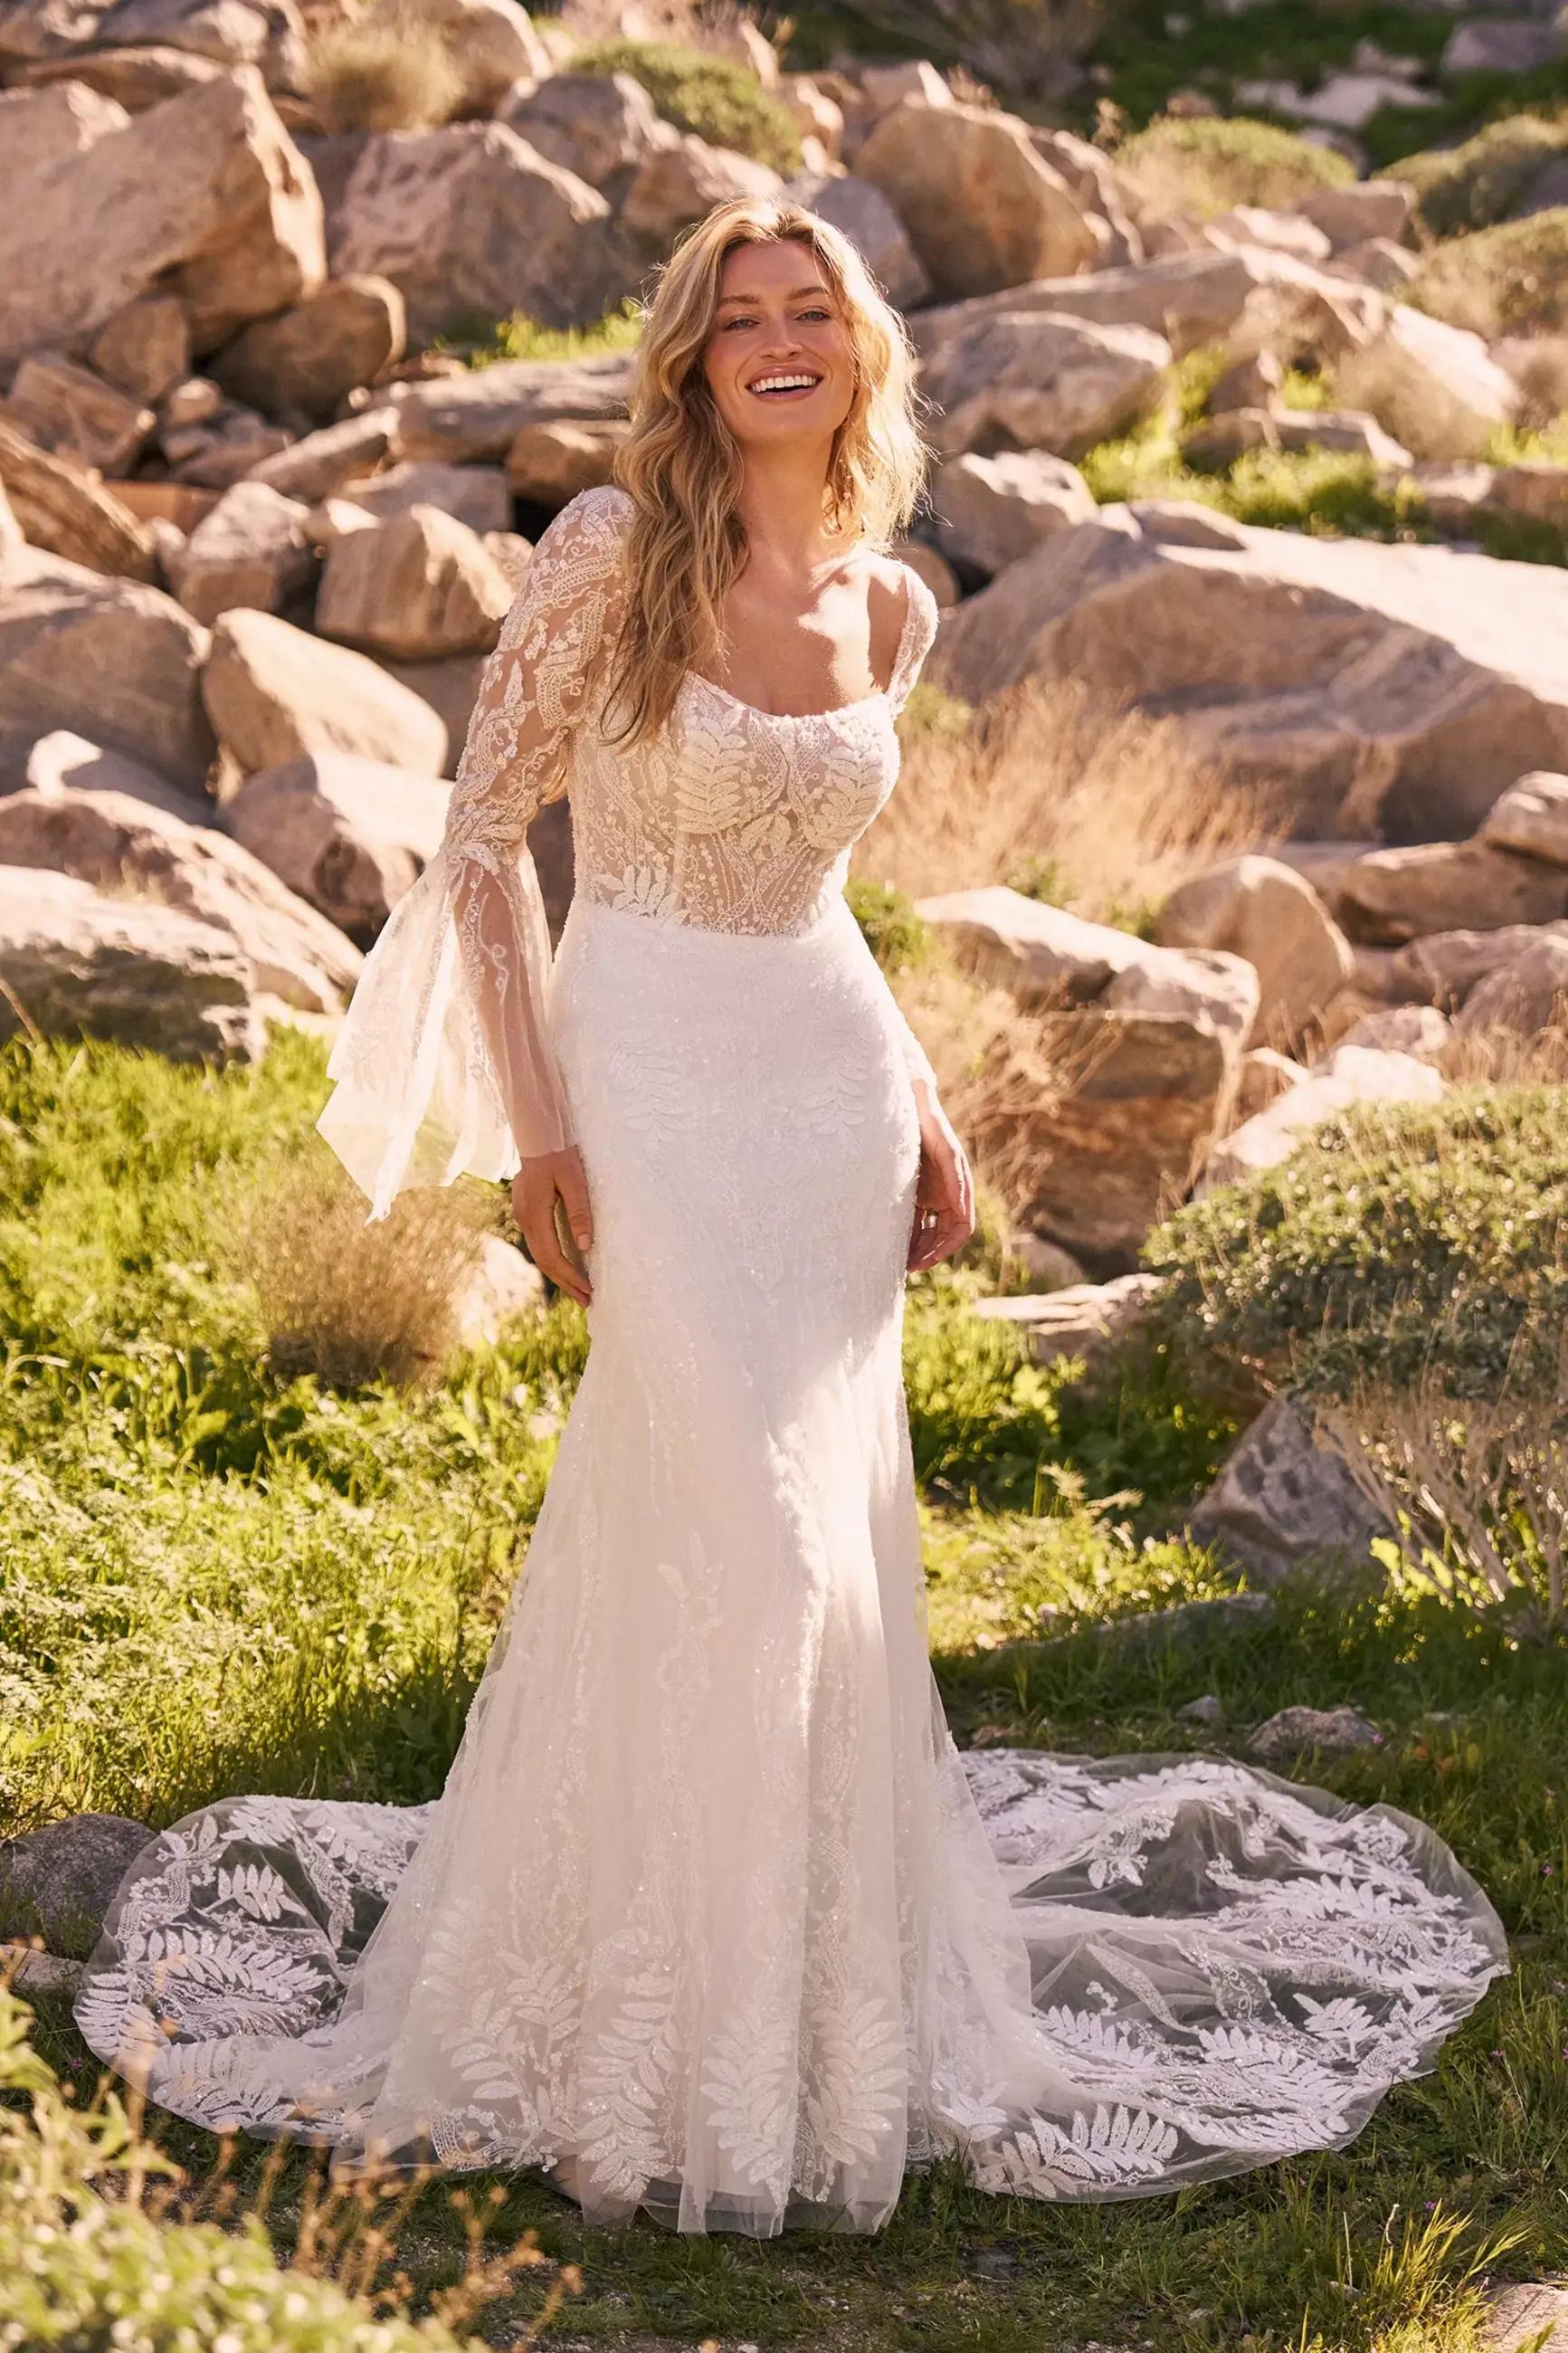 Spring Wedding Style Guide: Finding the Perfect Bridal Gown Image